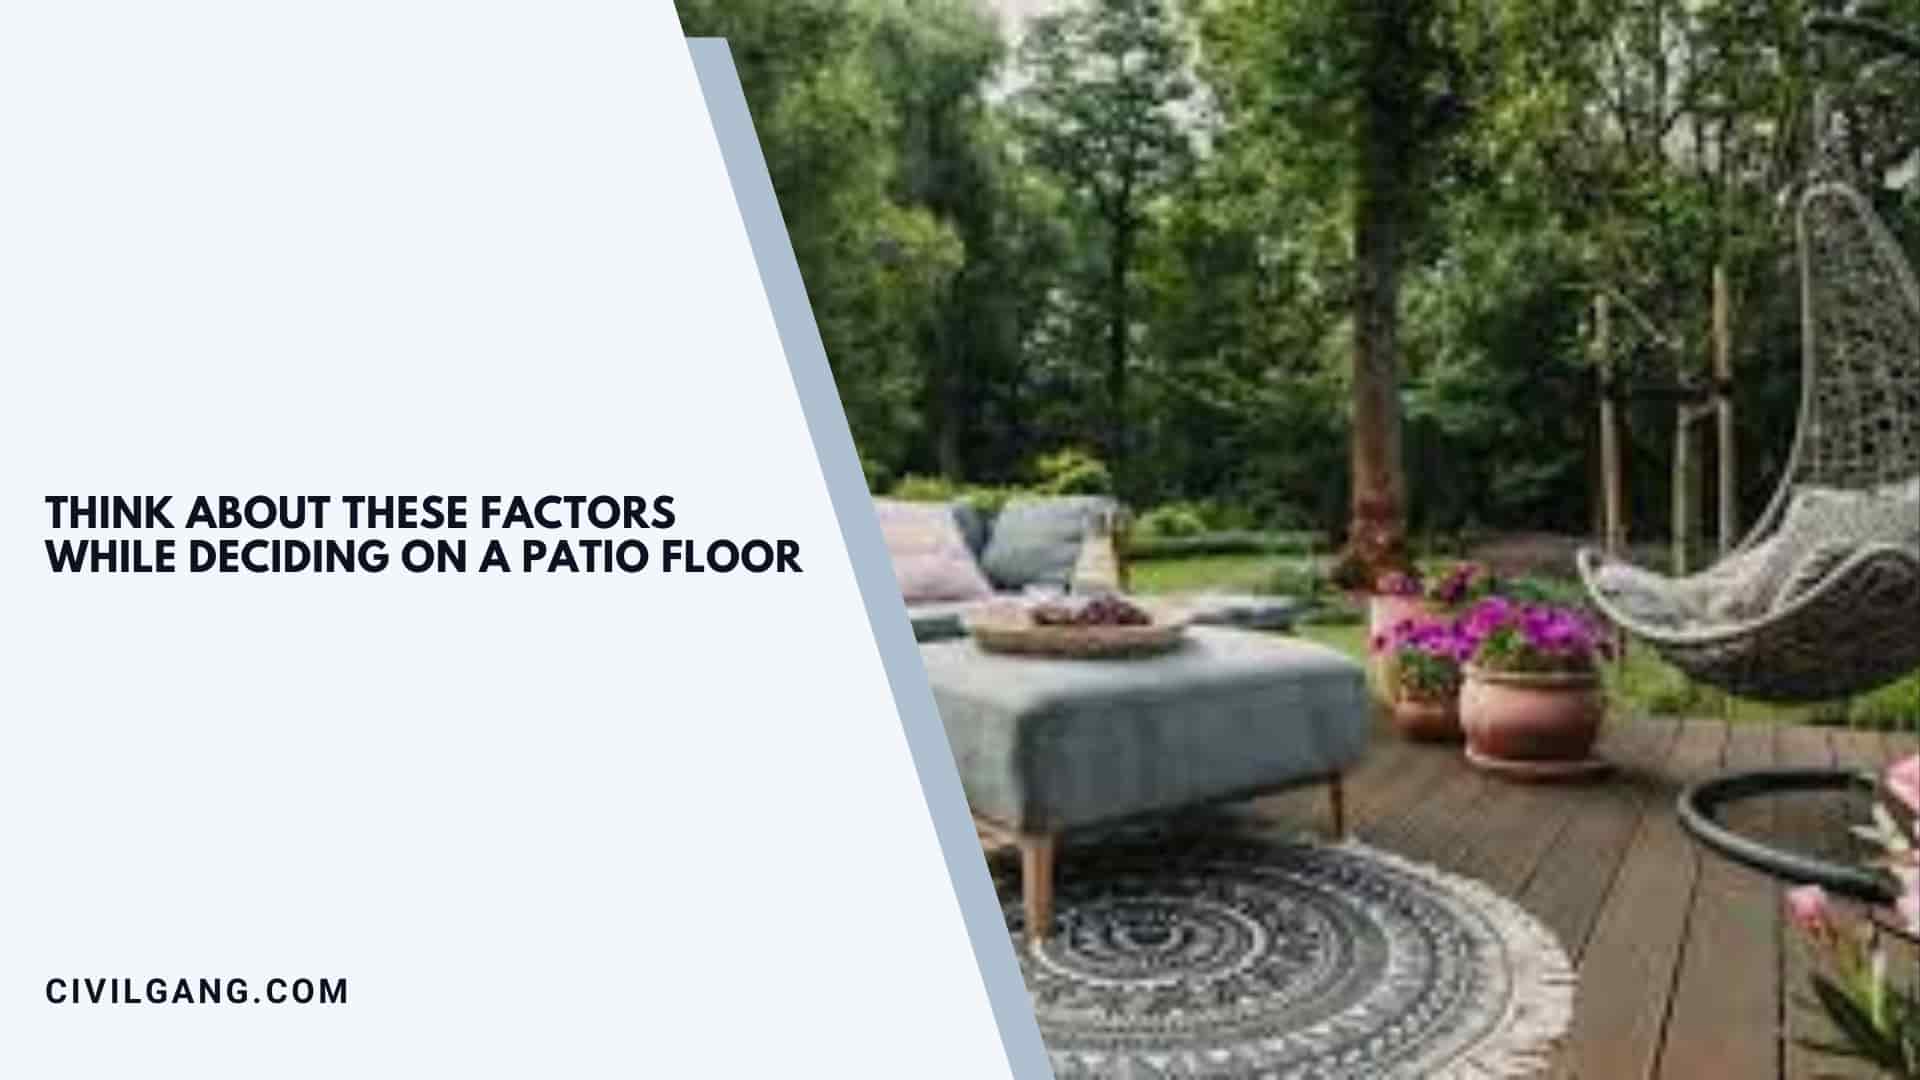 Think about these factors while deciding on a patio floor: